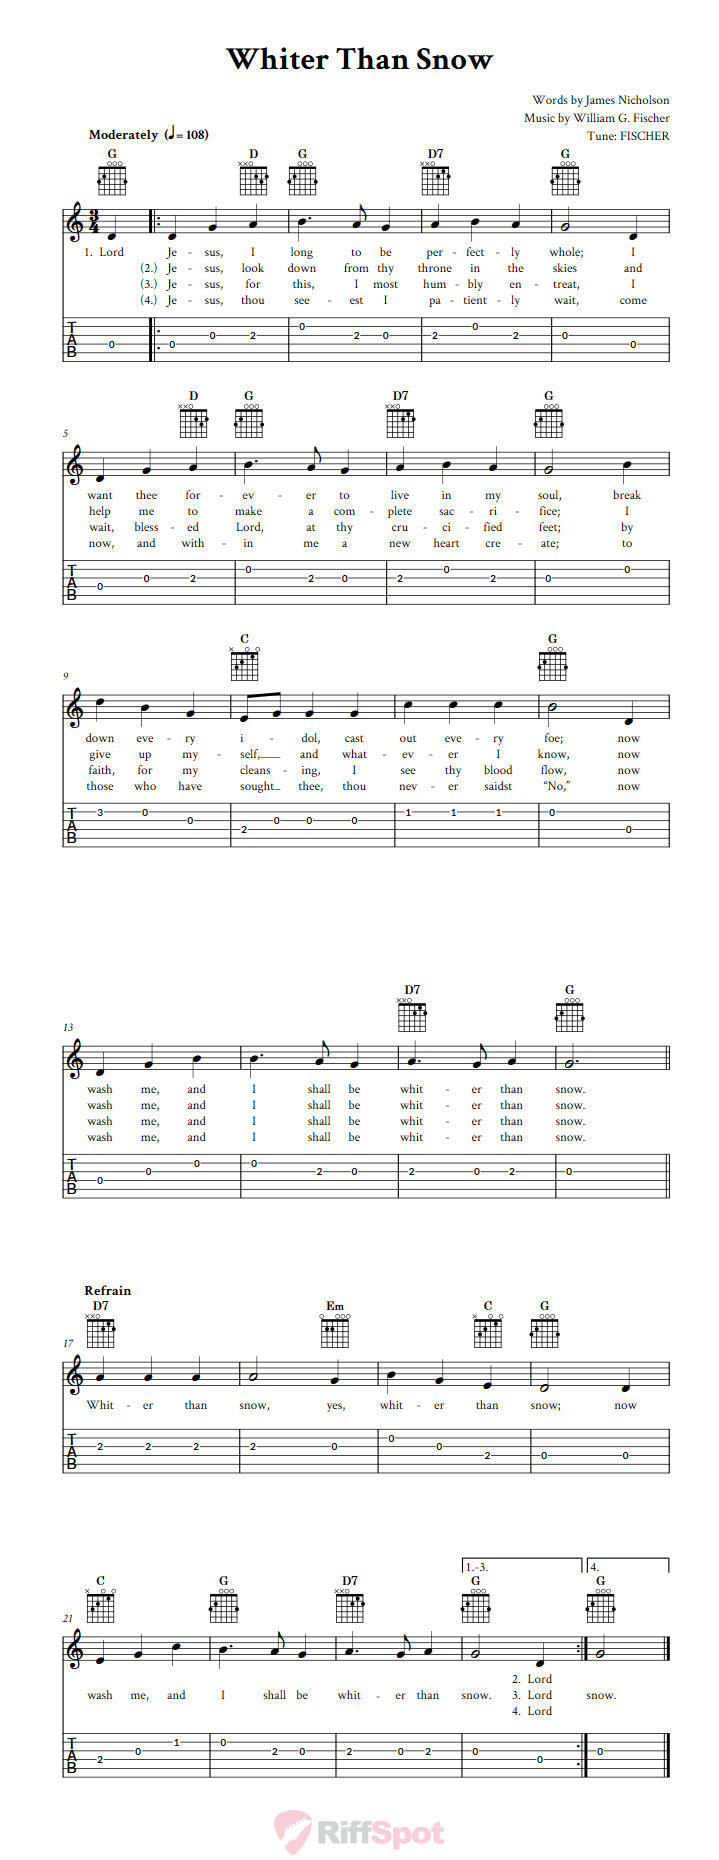 Whiter than - Easy Guitar Sheet Music and Tab with Chords and Lyrics